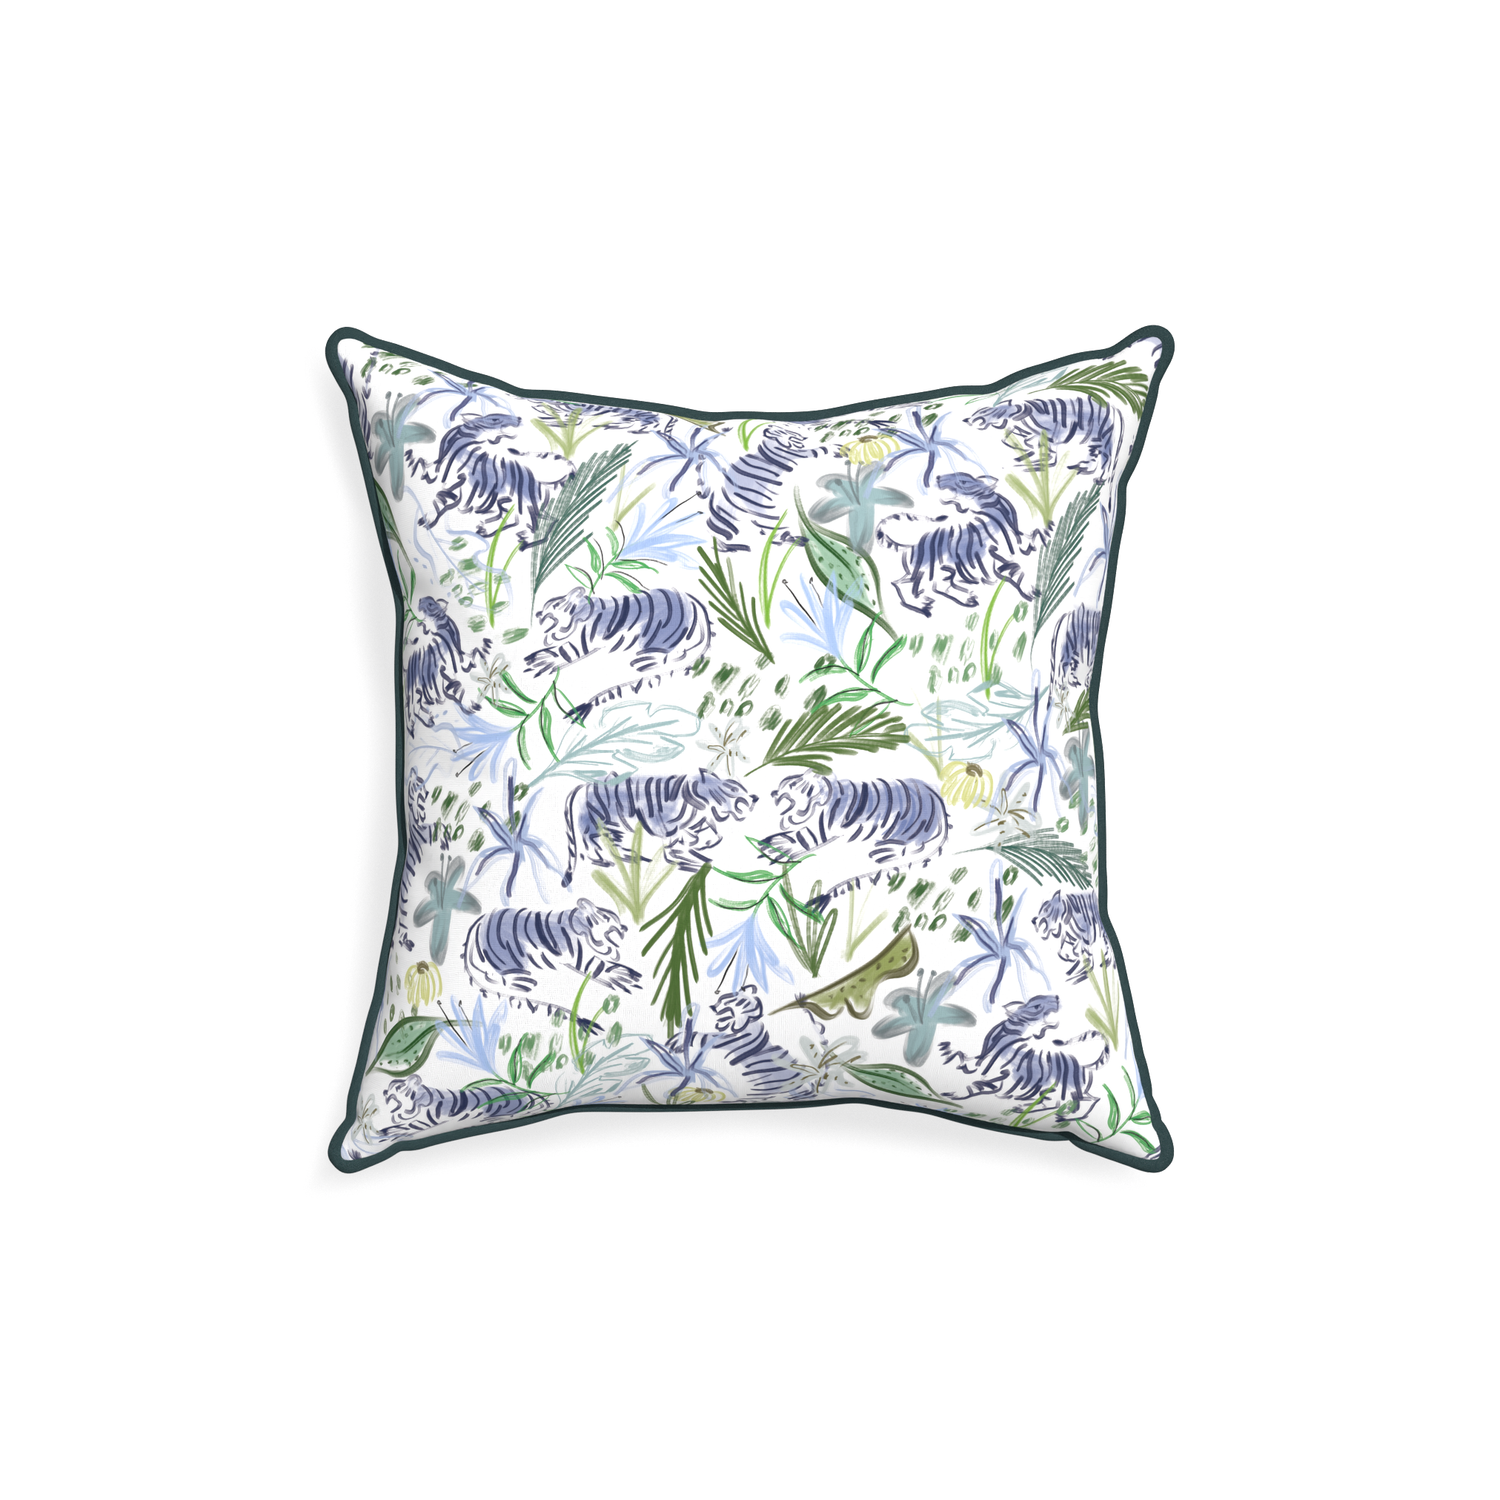 18-square frida green custom green tigerpillow with p piping on white background